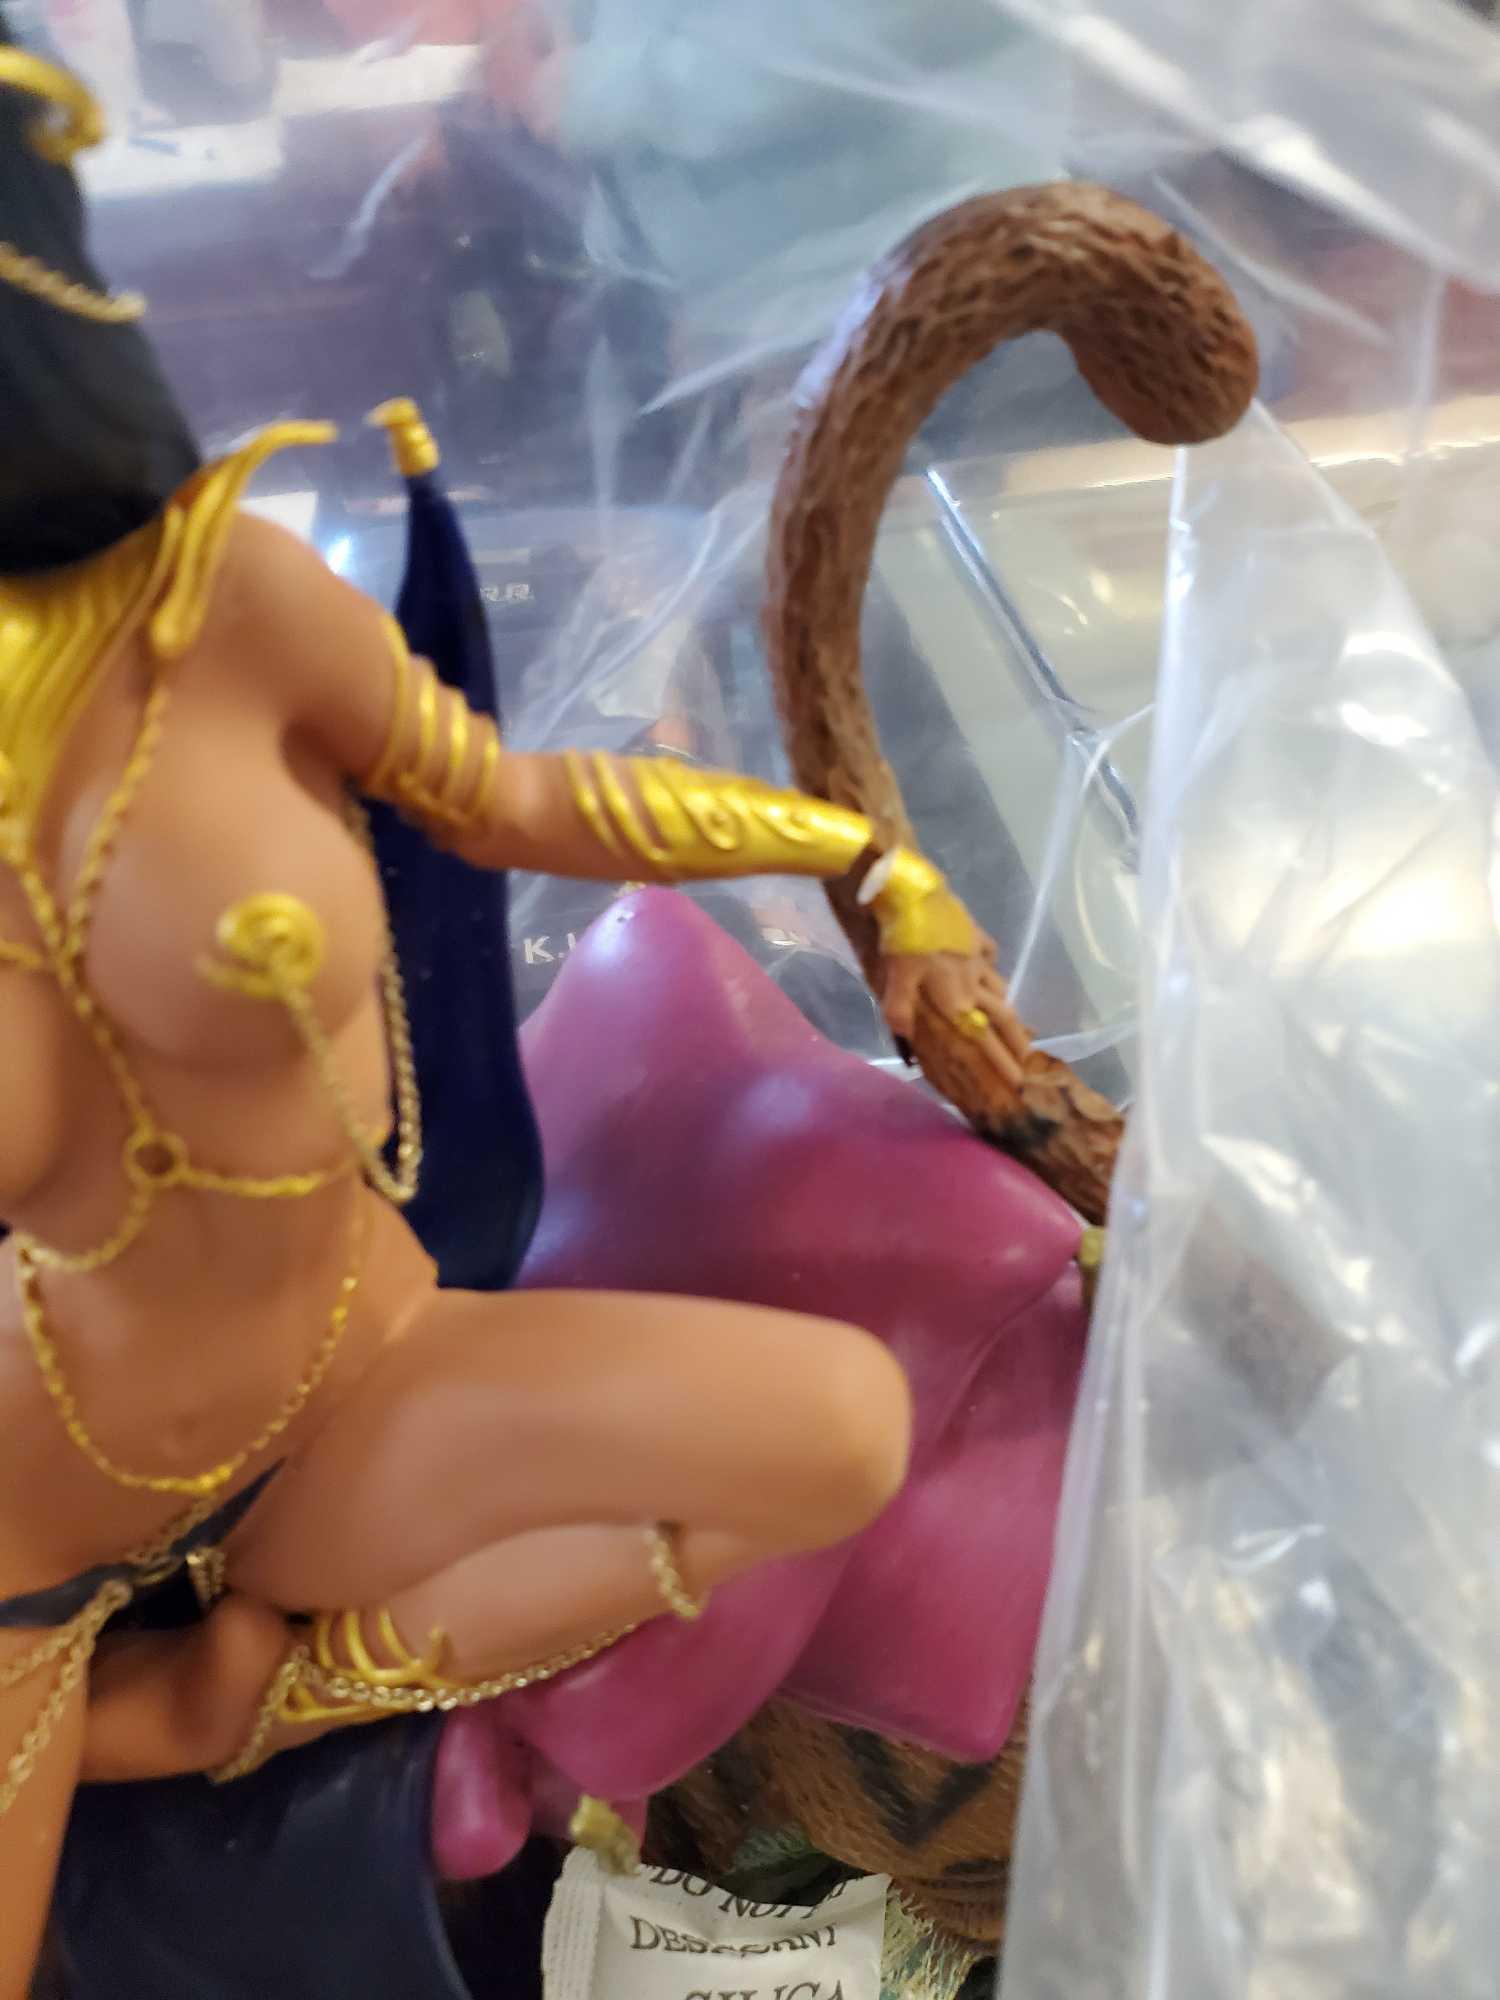 WOMEN OF DYNAMITE LIMITED EDITION DIORAMA, DEJAH THORIS, COMES WITH PAPERWORK 53 OF 99. BOX IS IN